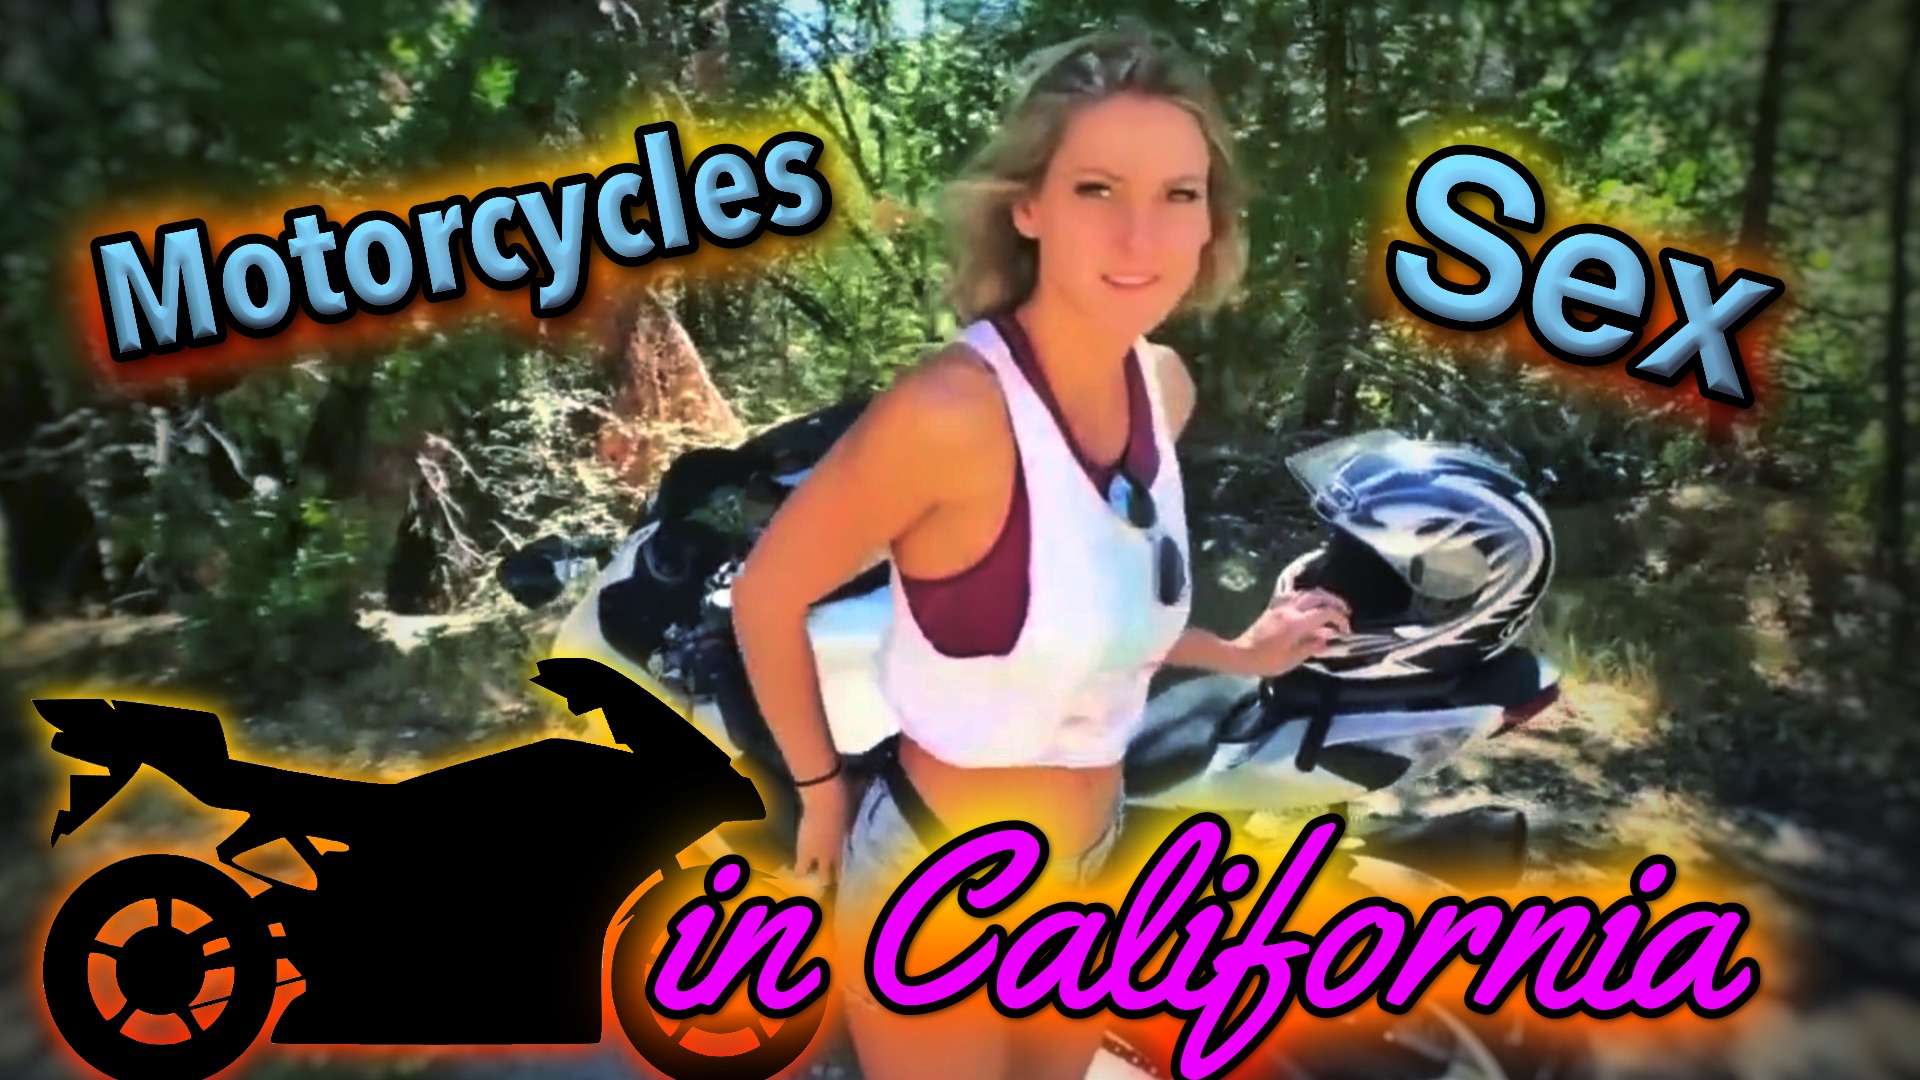 Sexy Motorcycle ride in Cali